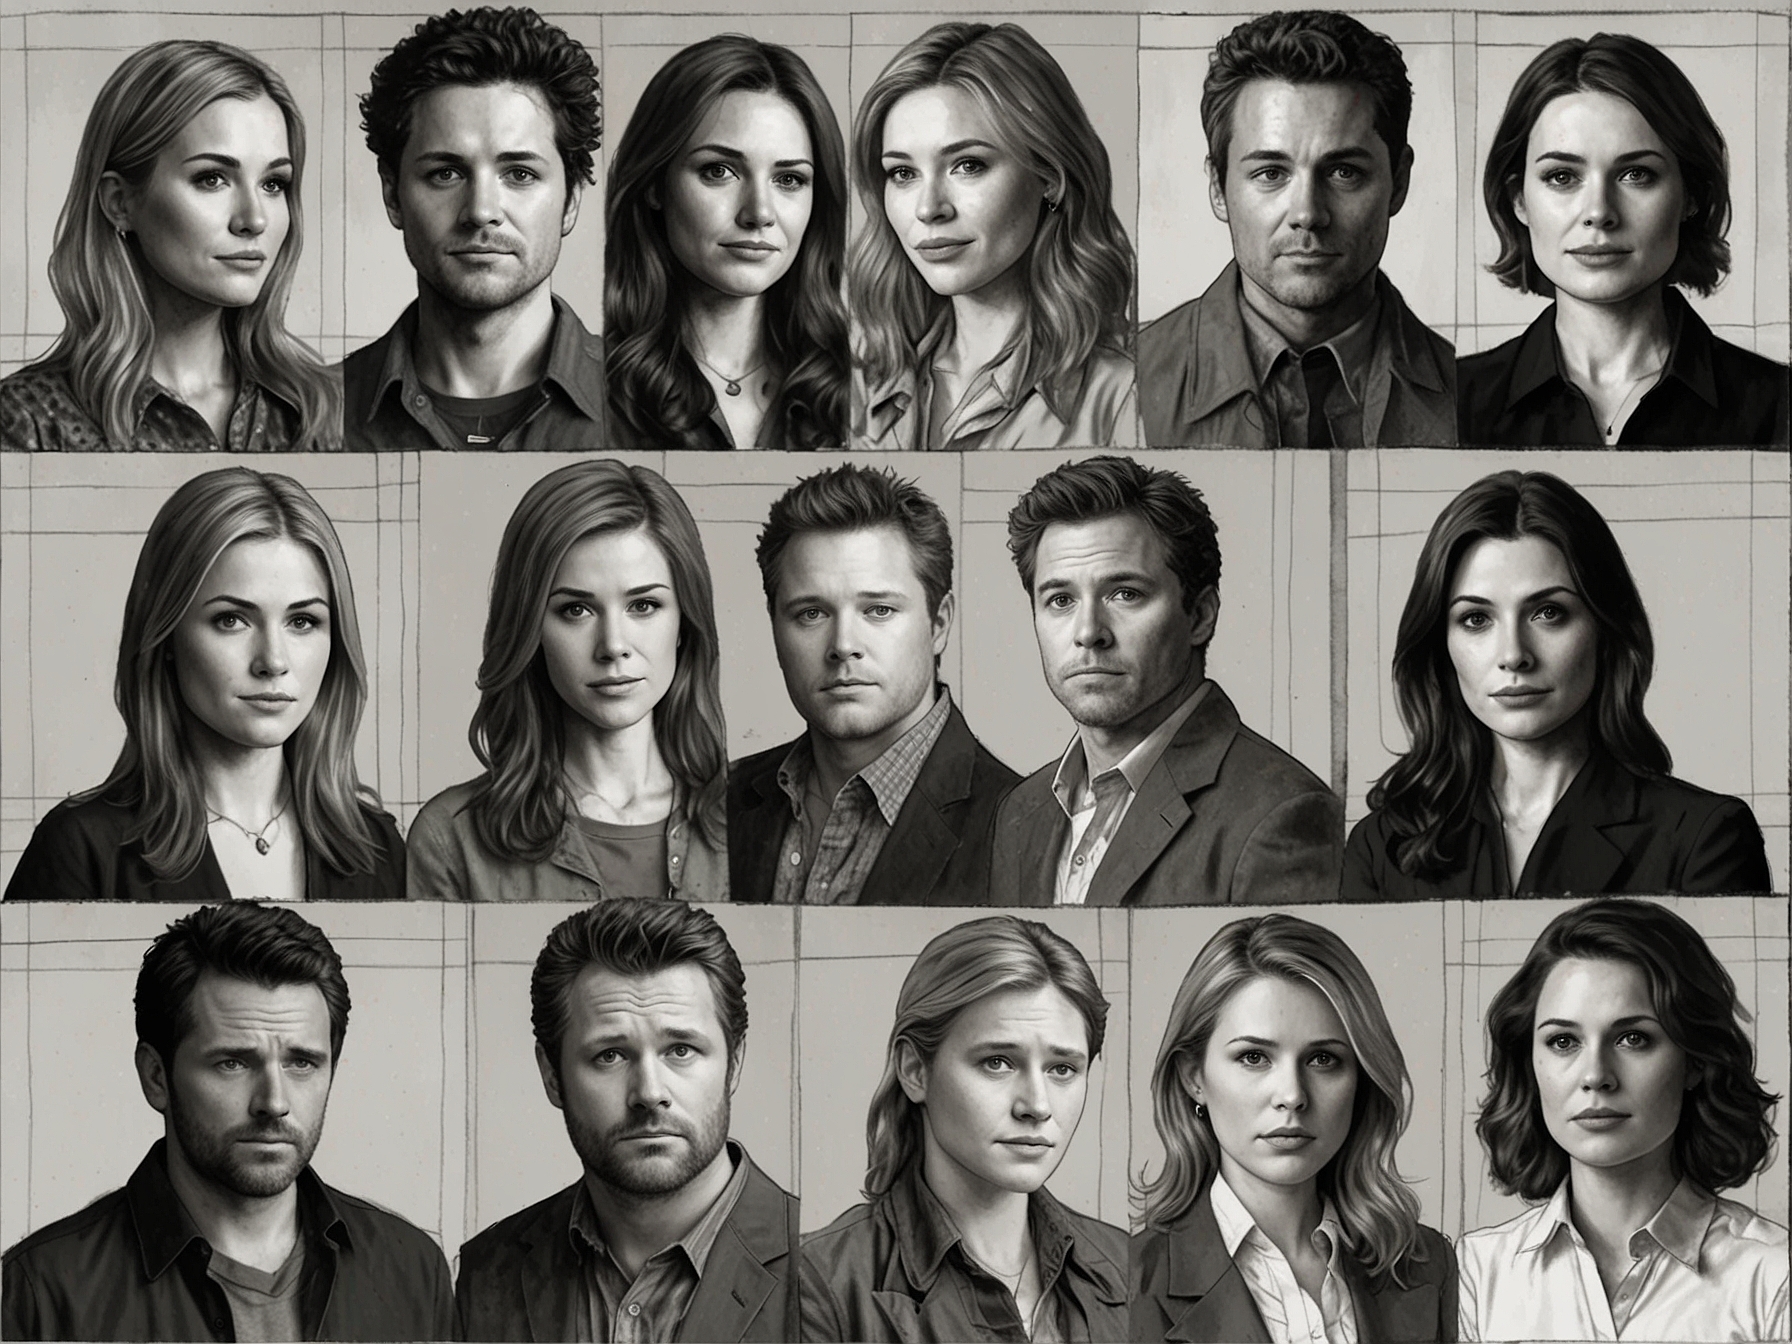 A divided screen showing some of the most disappointing TV couples, including Carmy and Claire from 'The Bear,' and Lucy and Stephen from 'Tell Me Lies', showcasing their lack of chemistry and poor relationship dynamics.